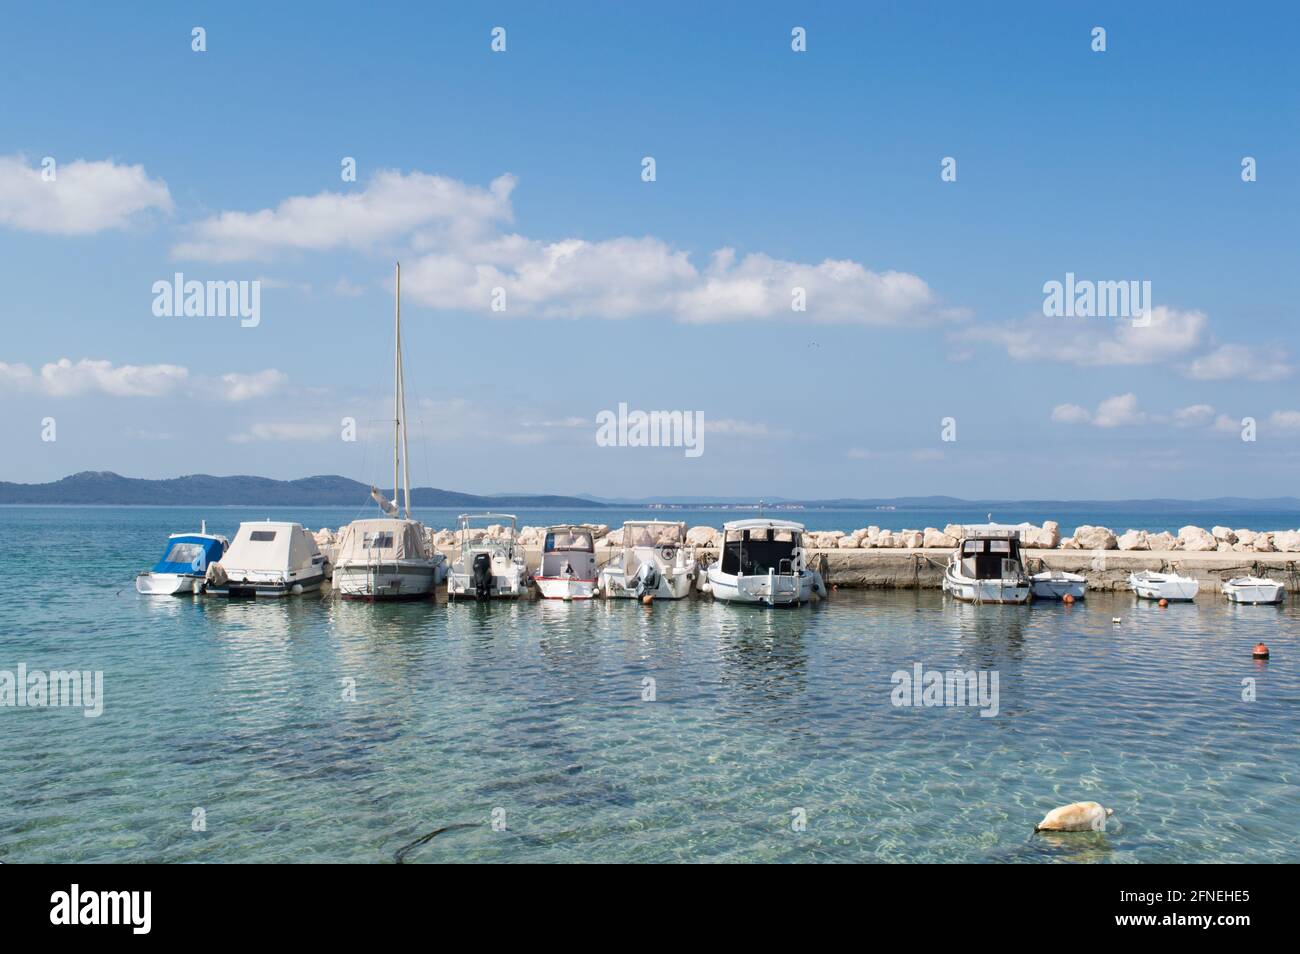 Small recreational boats moored on the stone pier, blue and clean Adriatic sea, in Zadar, Croatia Stock Photo